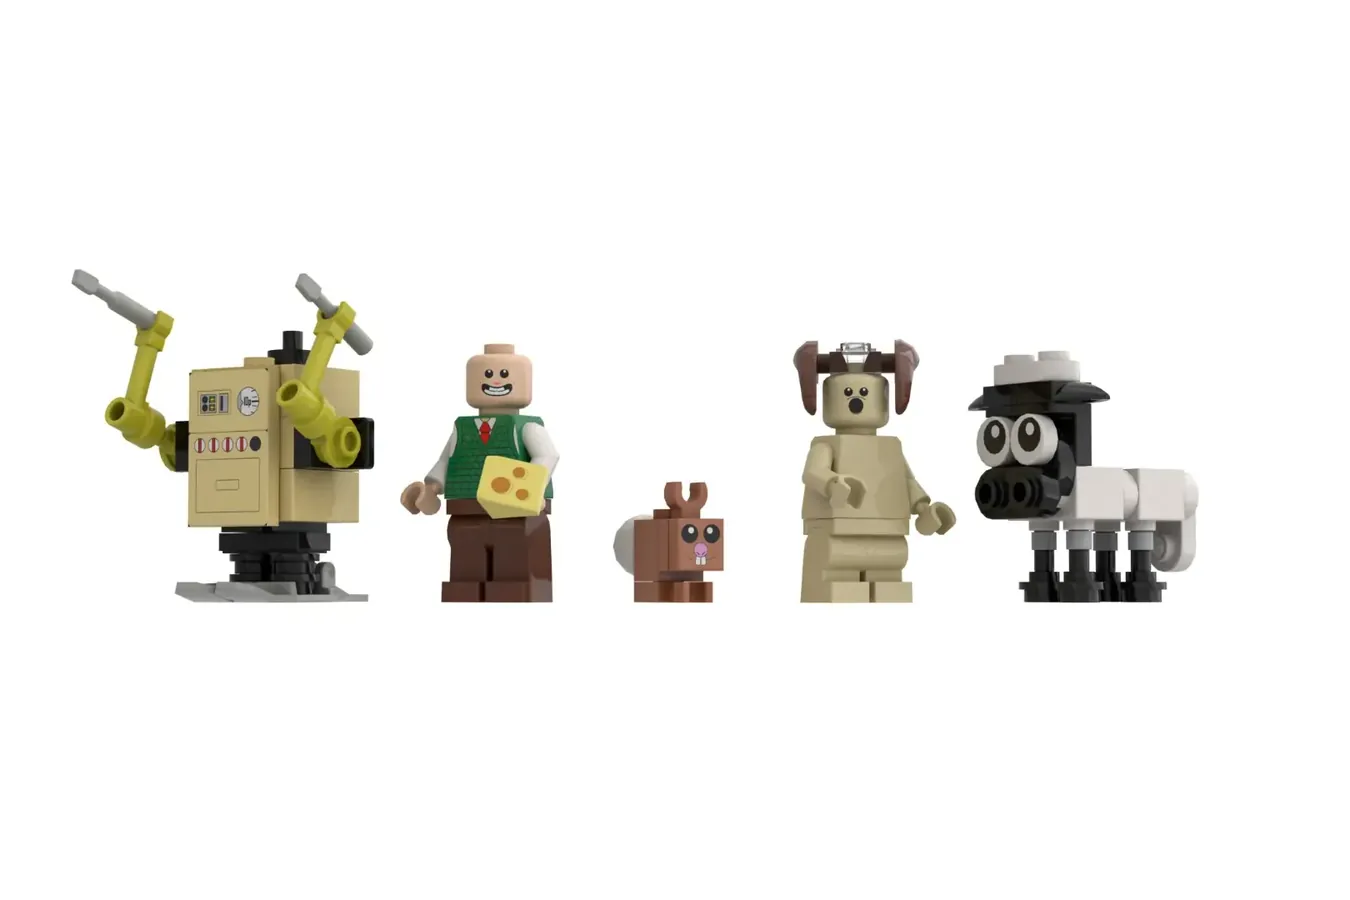 Lego (R) ideas for Wallace and Gromit